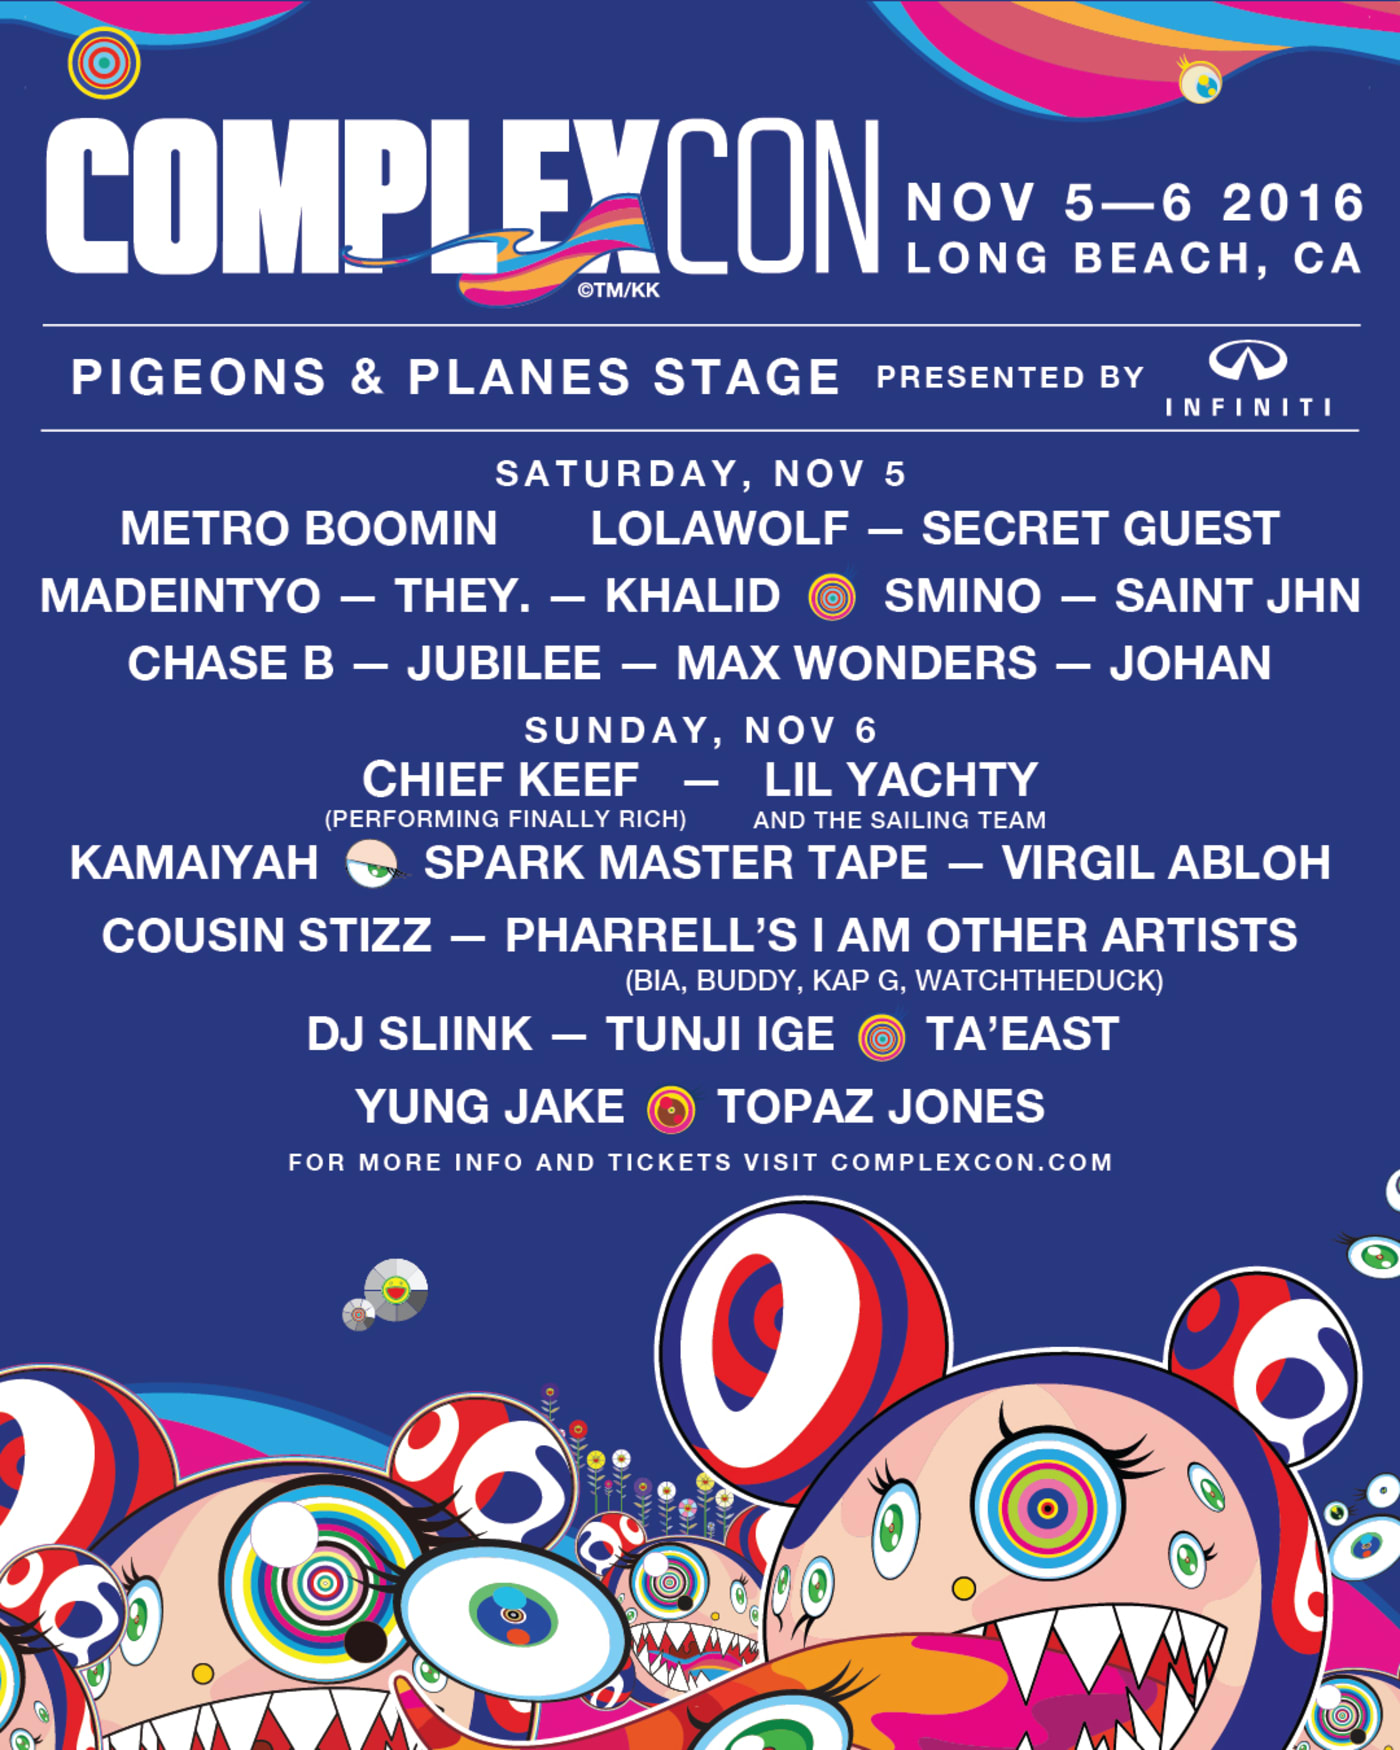 Here’s the Full Lineup For the Pigeons & Planes Stage at ComplexCon